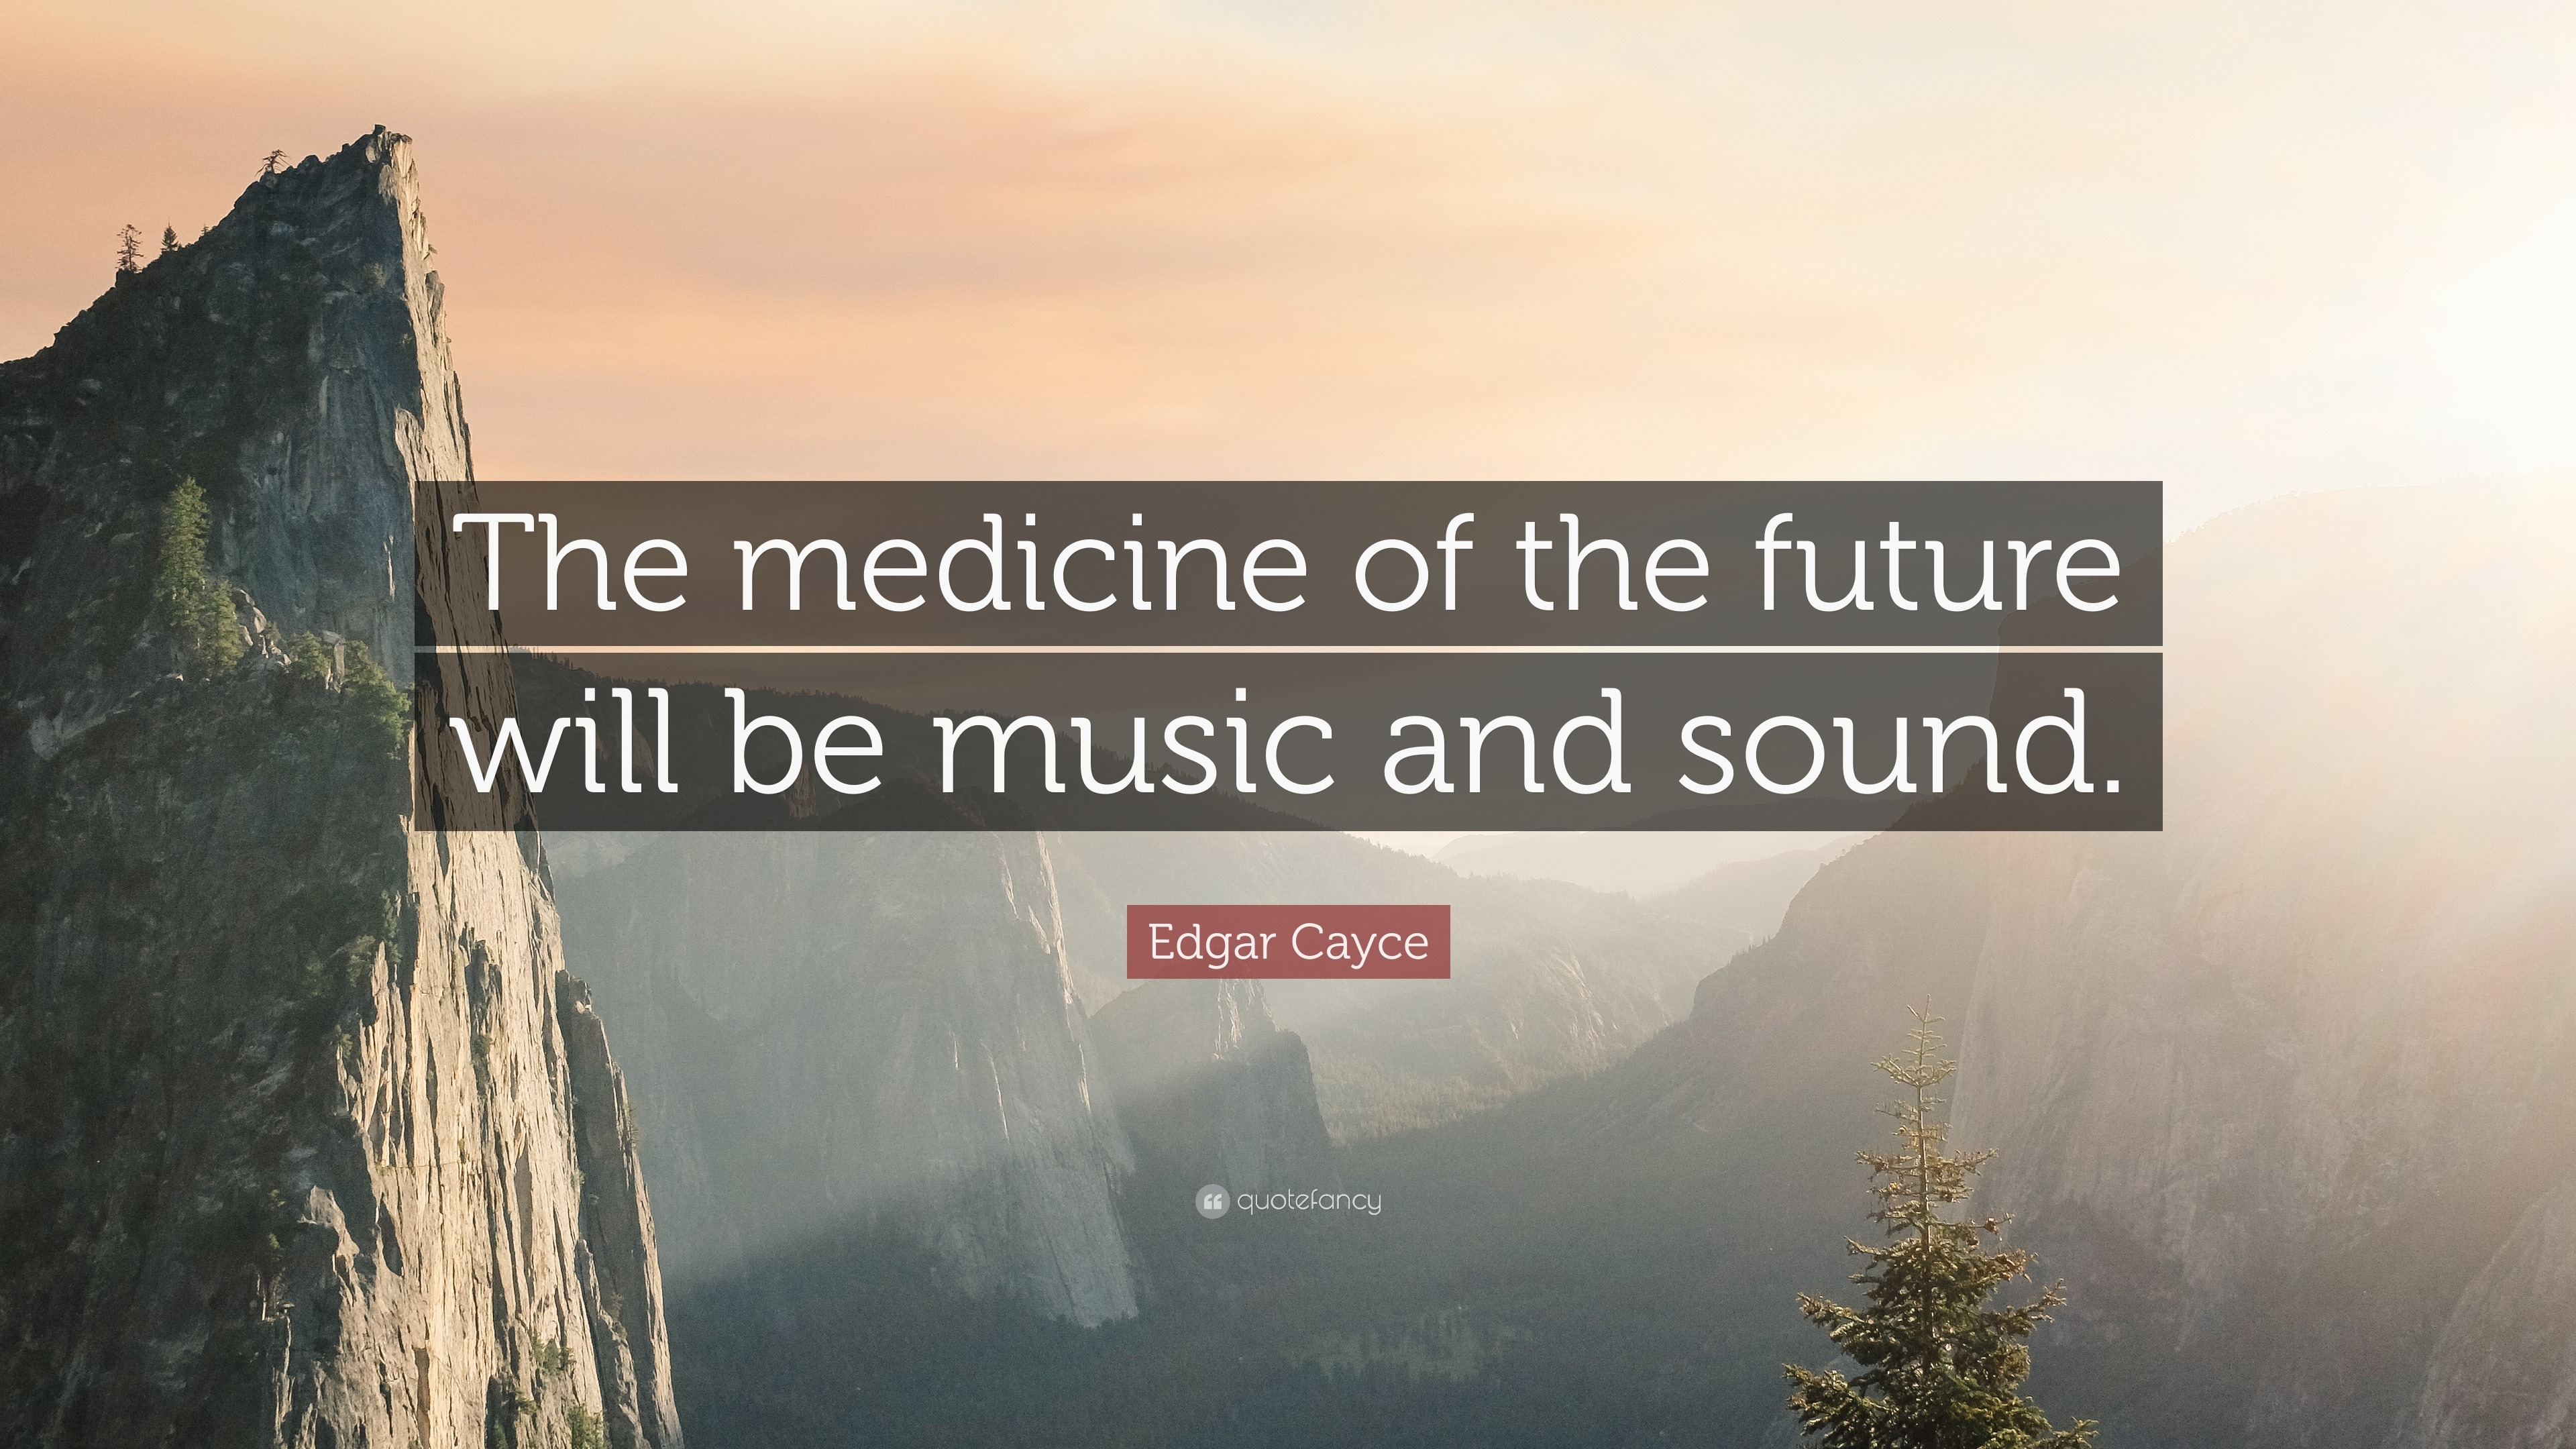 Edgar Cayce Quotes (95 wallpapers) - Quotefancy